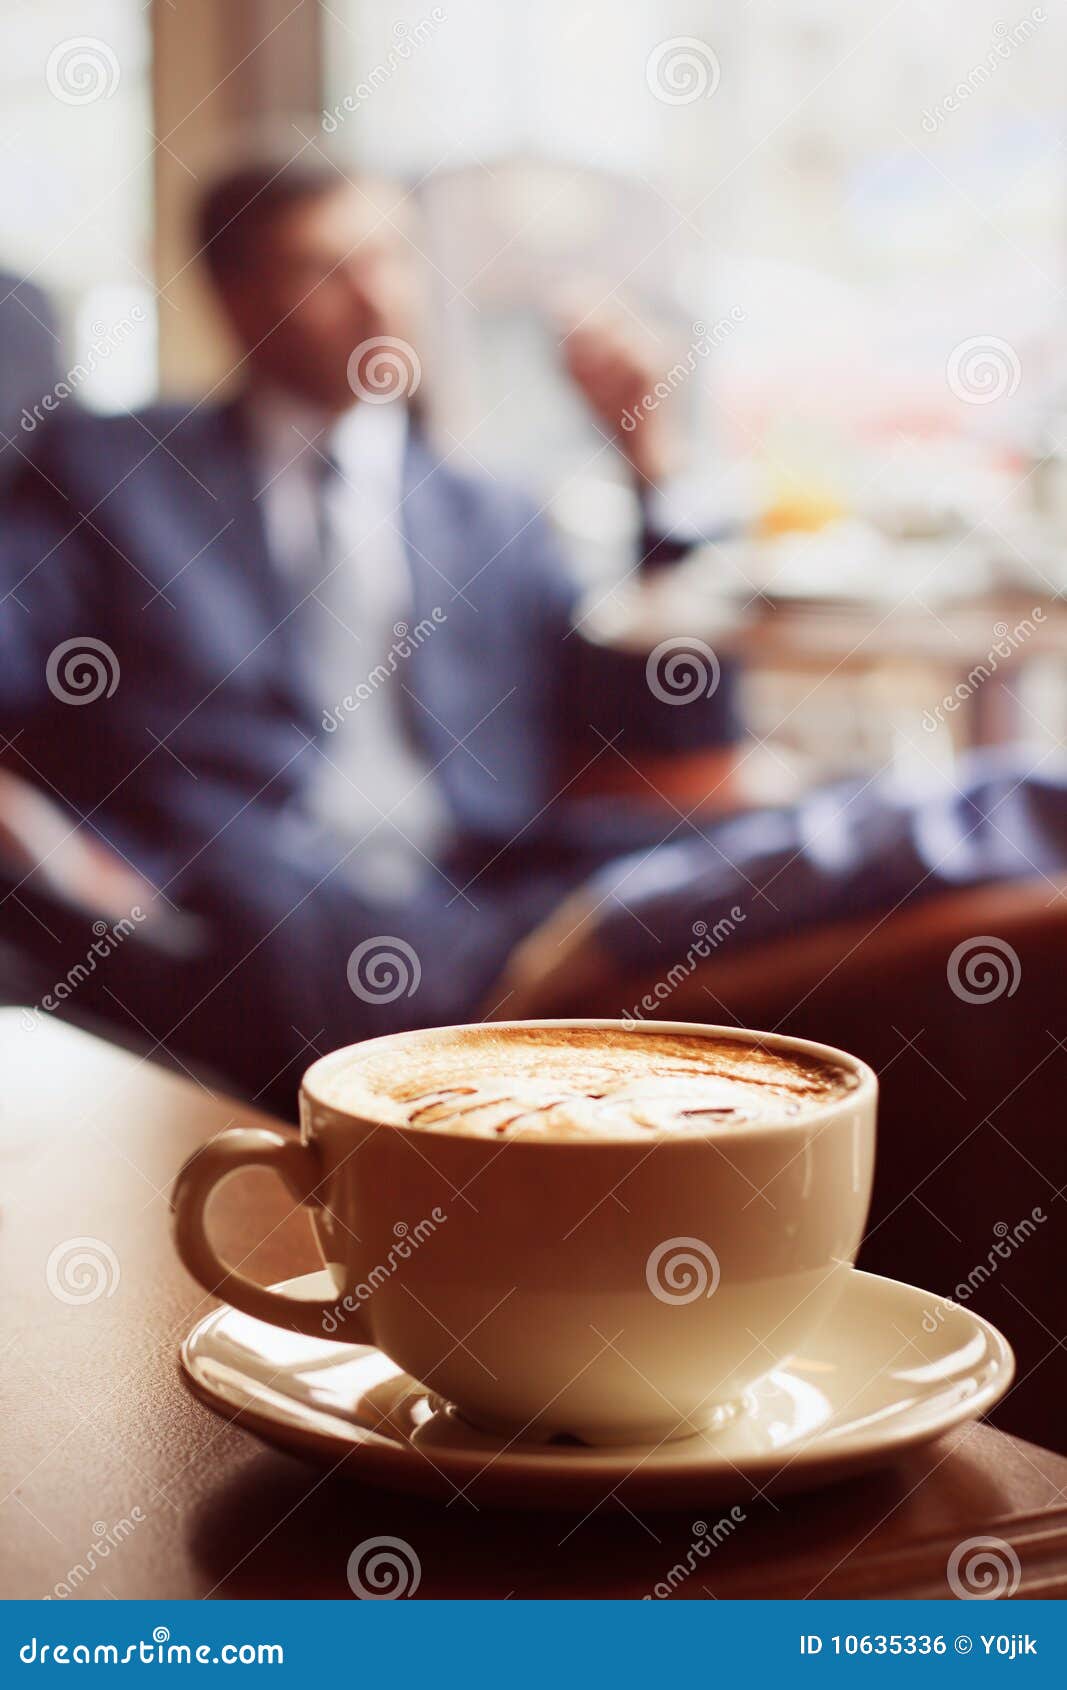 Coffee Cup On The Table Royalty Free Stock Image - Image: 10635336